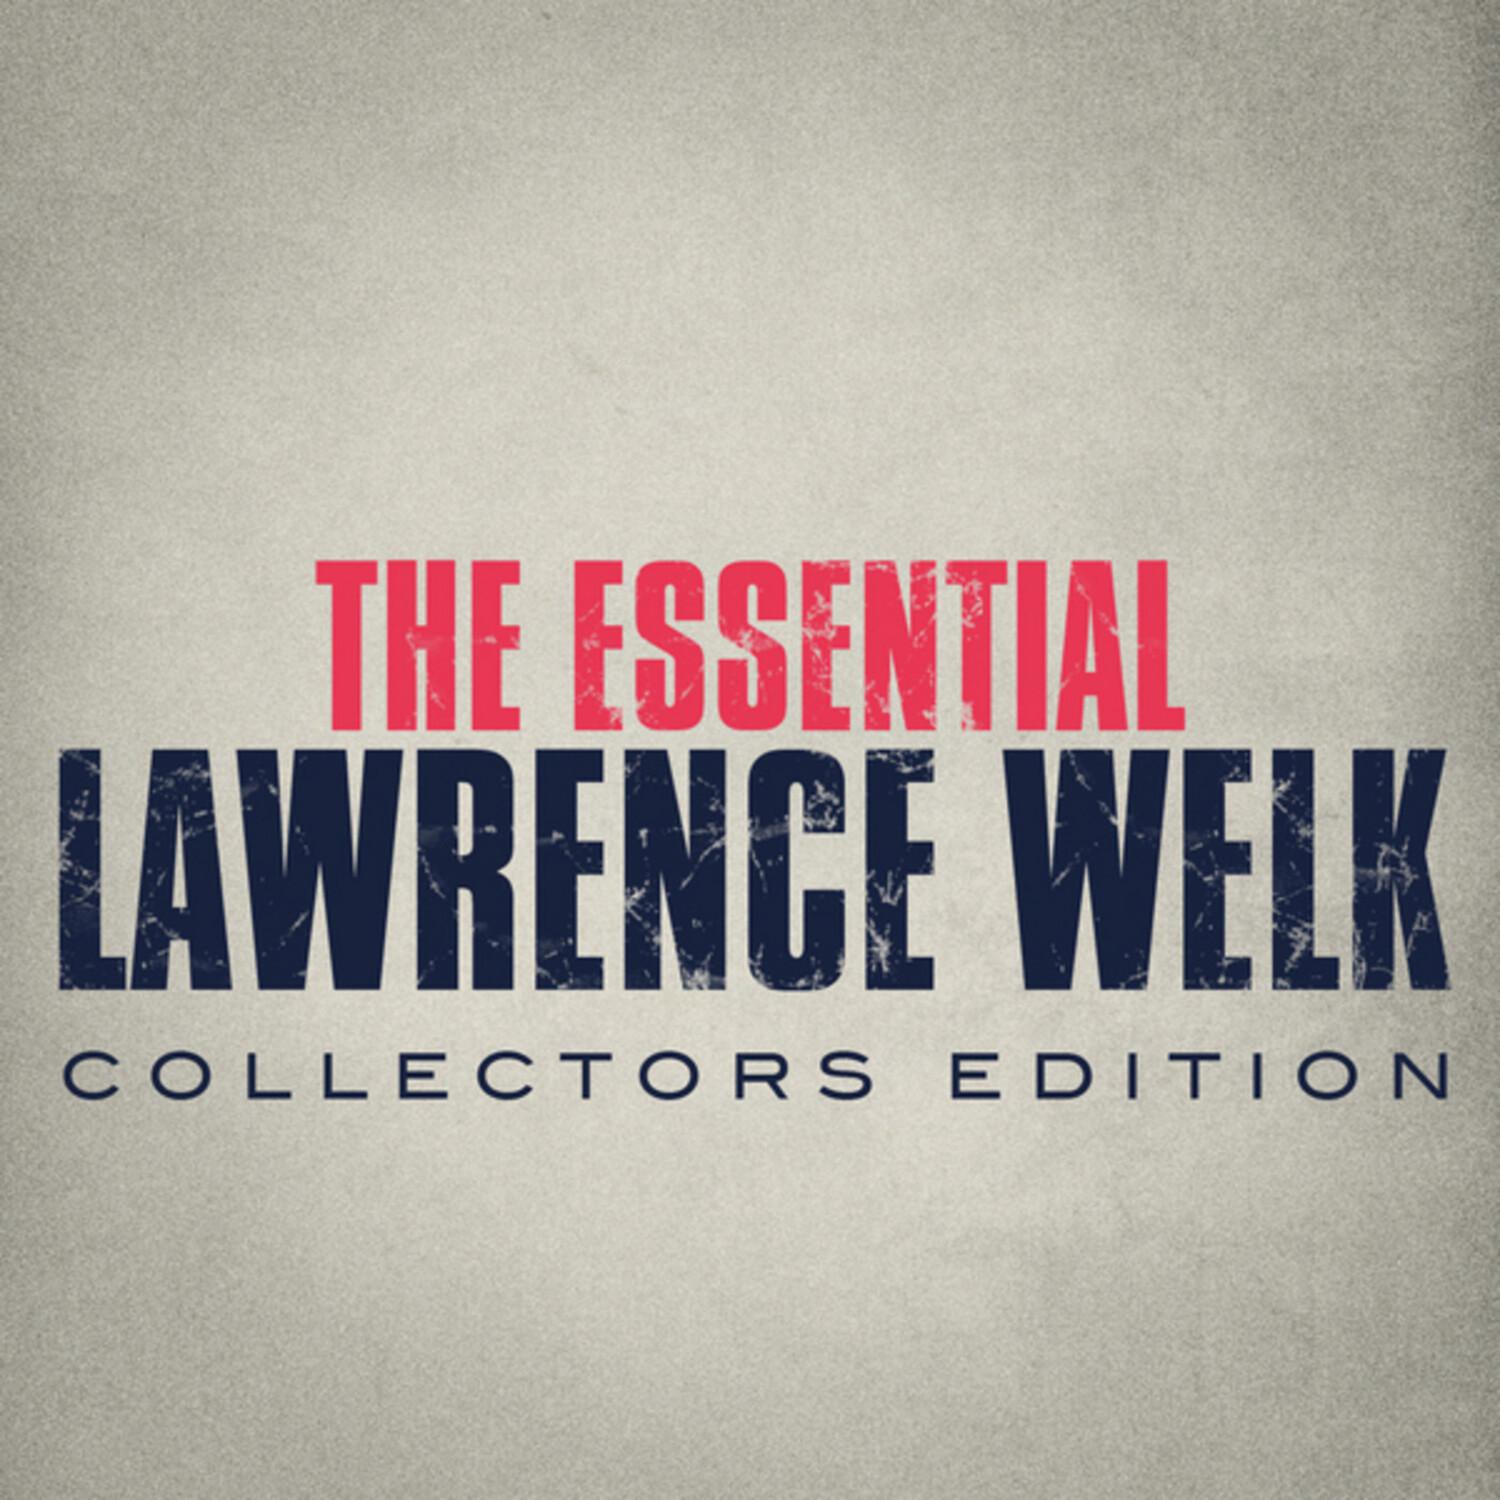 The Essential Lawrence Welk